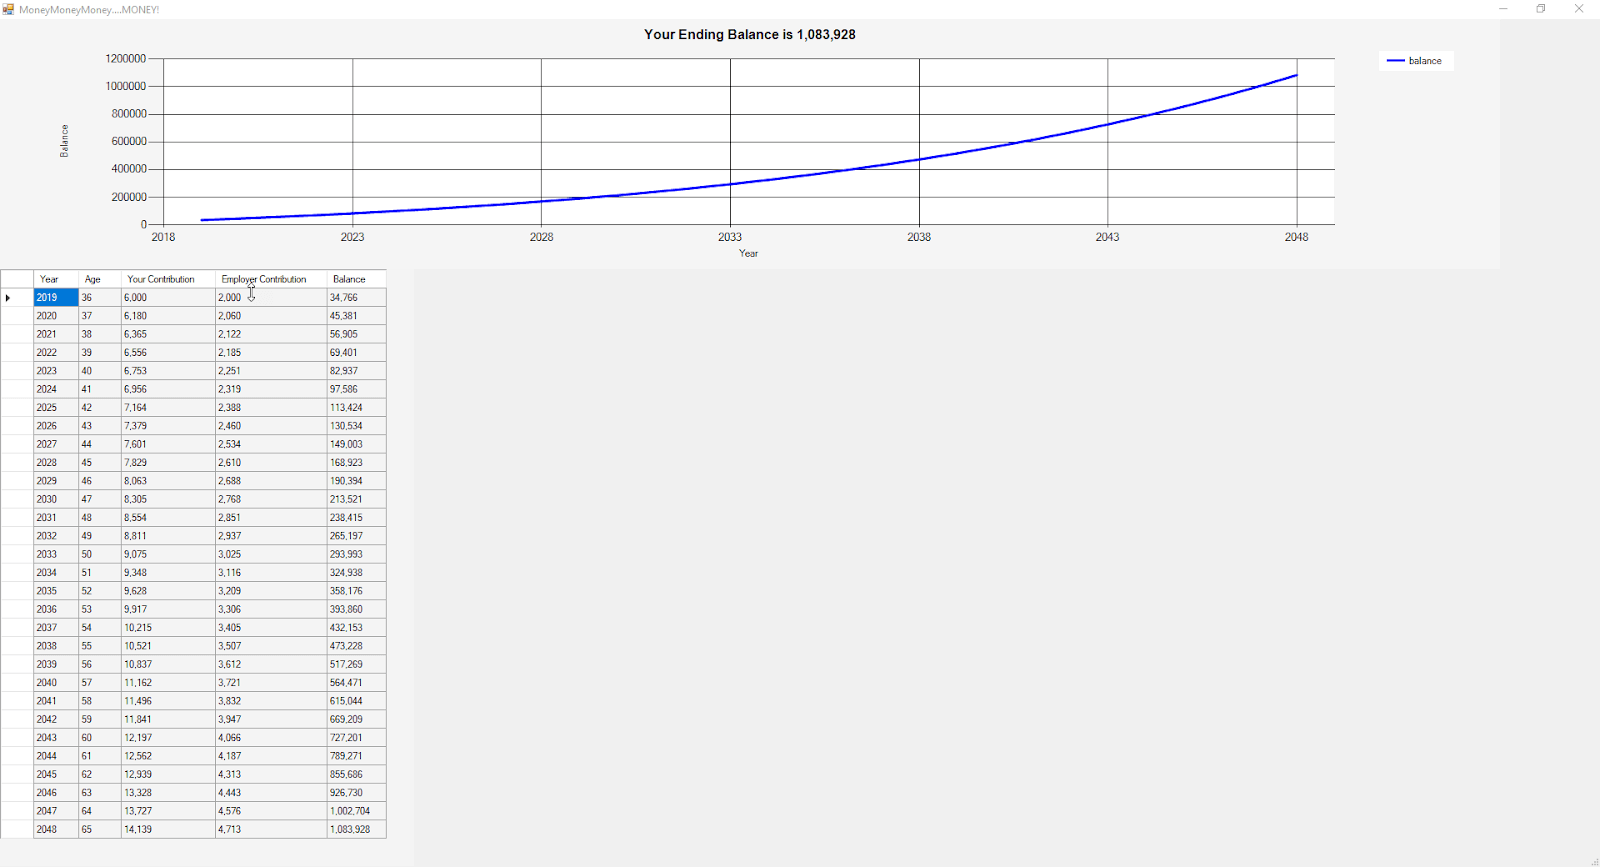 PowerShell retirement over time calculations